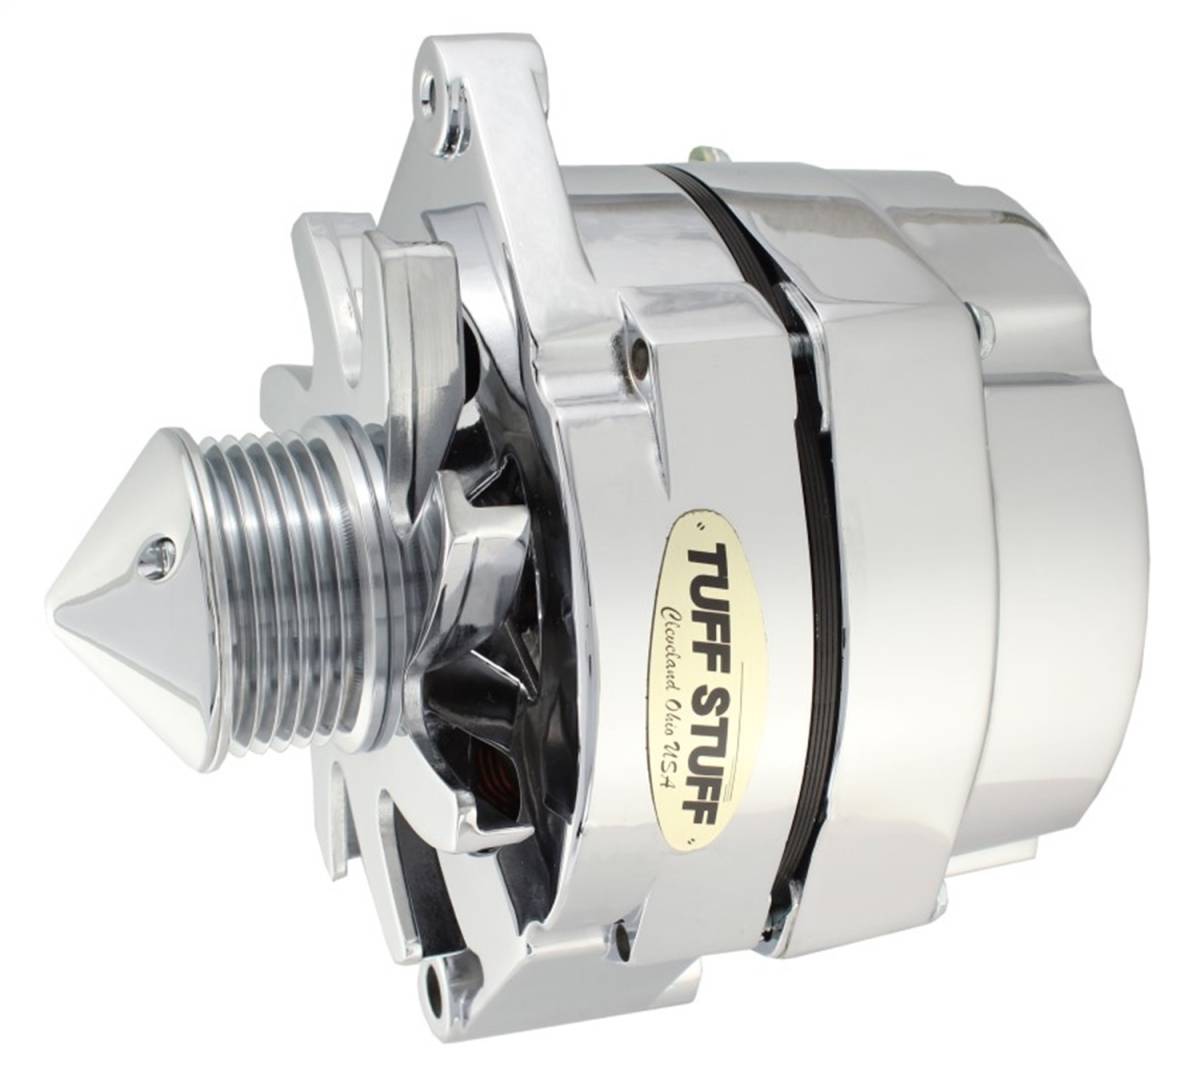 Tuff Stuff Performance - Silver Bullet Alternator 140 AMP OEM Or 1 Wire 6 Groove Pulley 4.85 in. Case Depth Lower Mount Boss 2 in. Long Chrome 12 Clocking 7140ABUL6G12